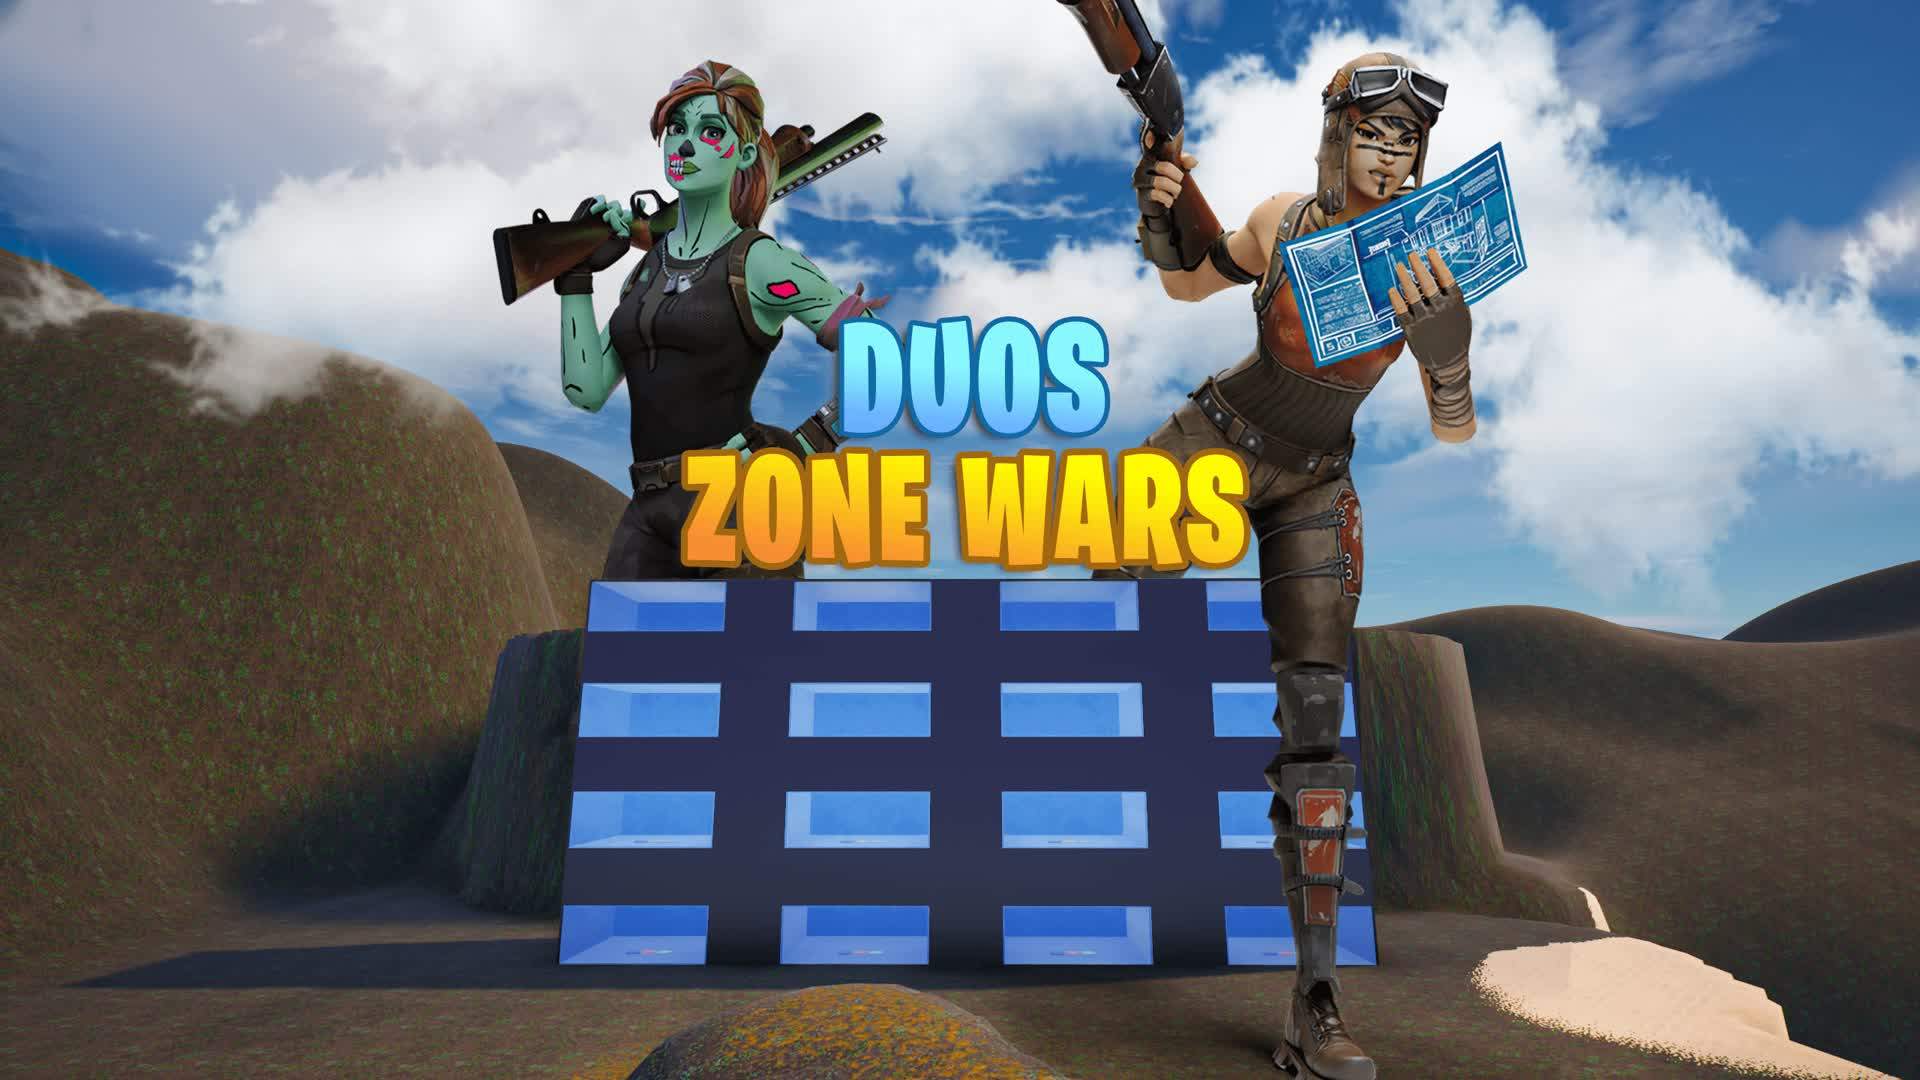 ⭐ZONE DUOS (32 PLAYER)⭐